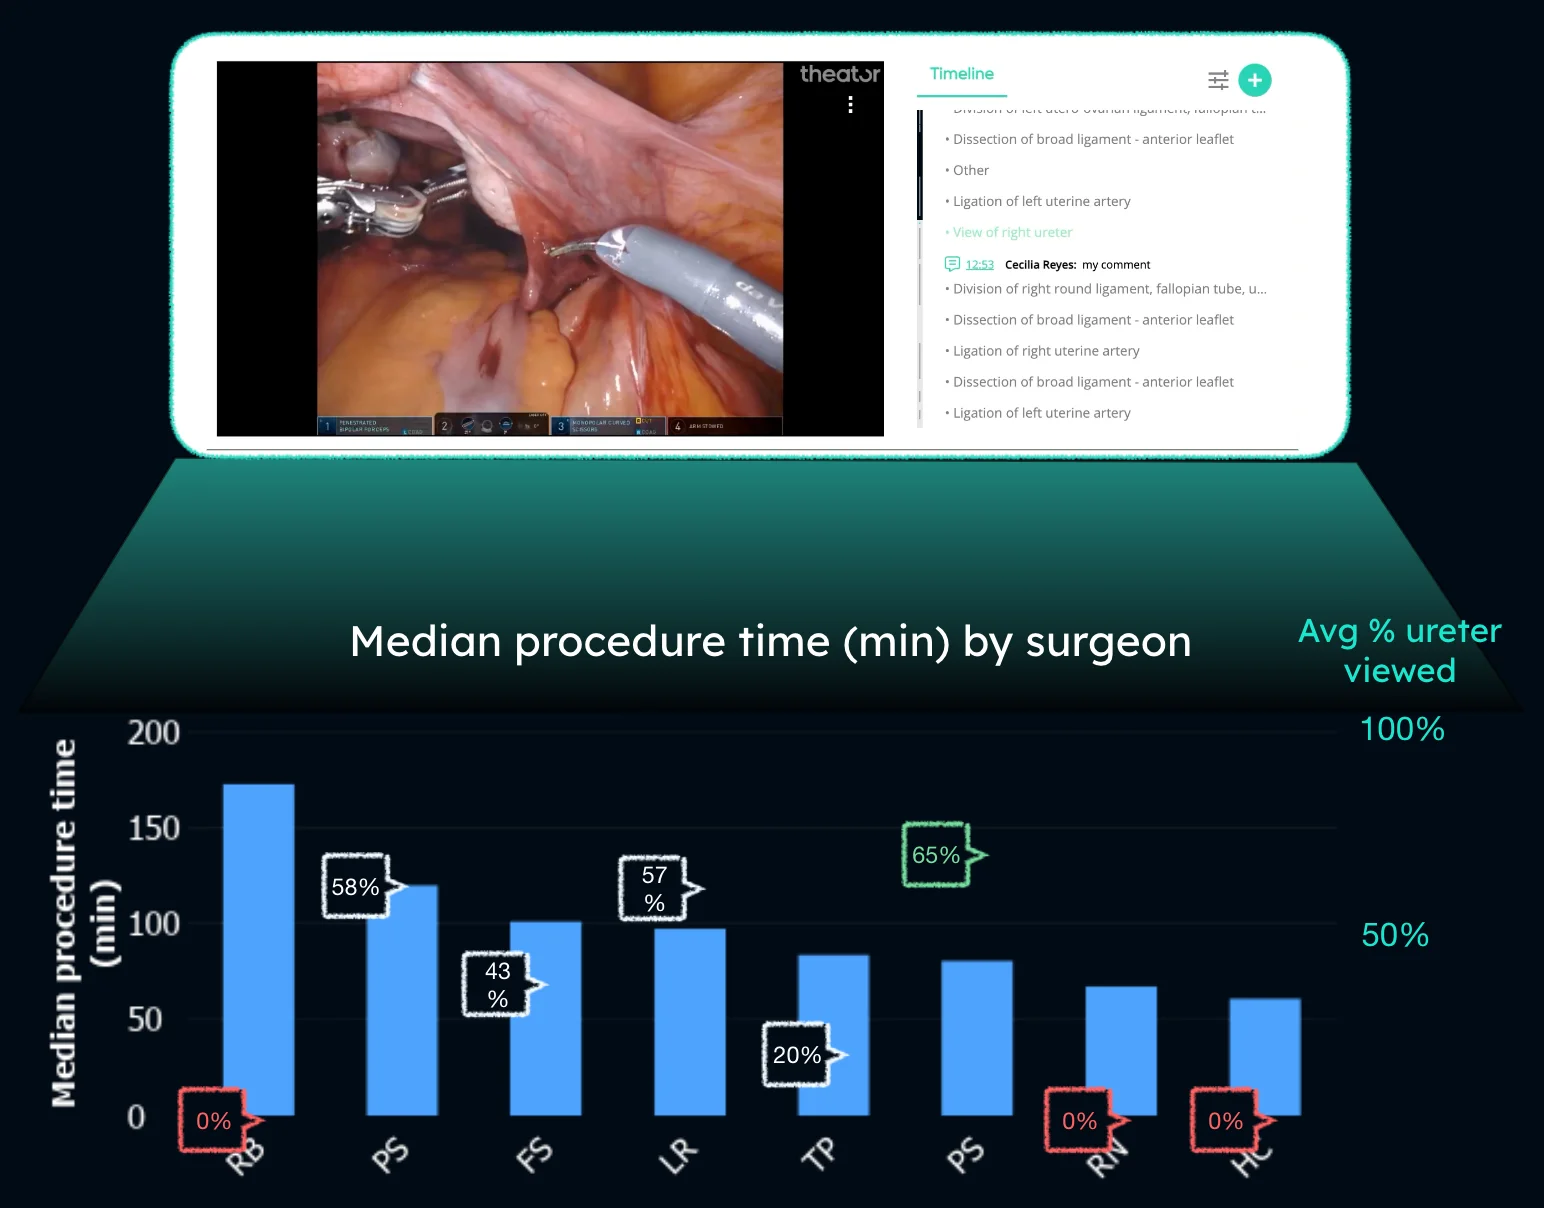 Screenshot from the Theator platform showing a timeline of surgery next to a still from a video of a procedure. Underneath the screenshot, a bar graph shows median procedure time in minutes by surgeon.